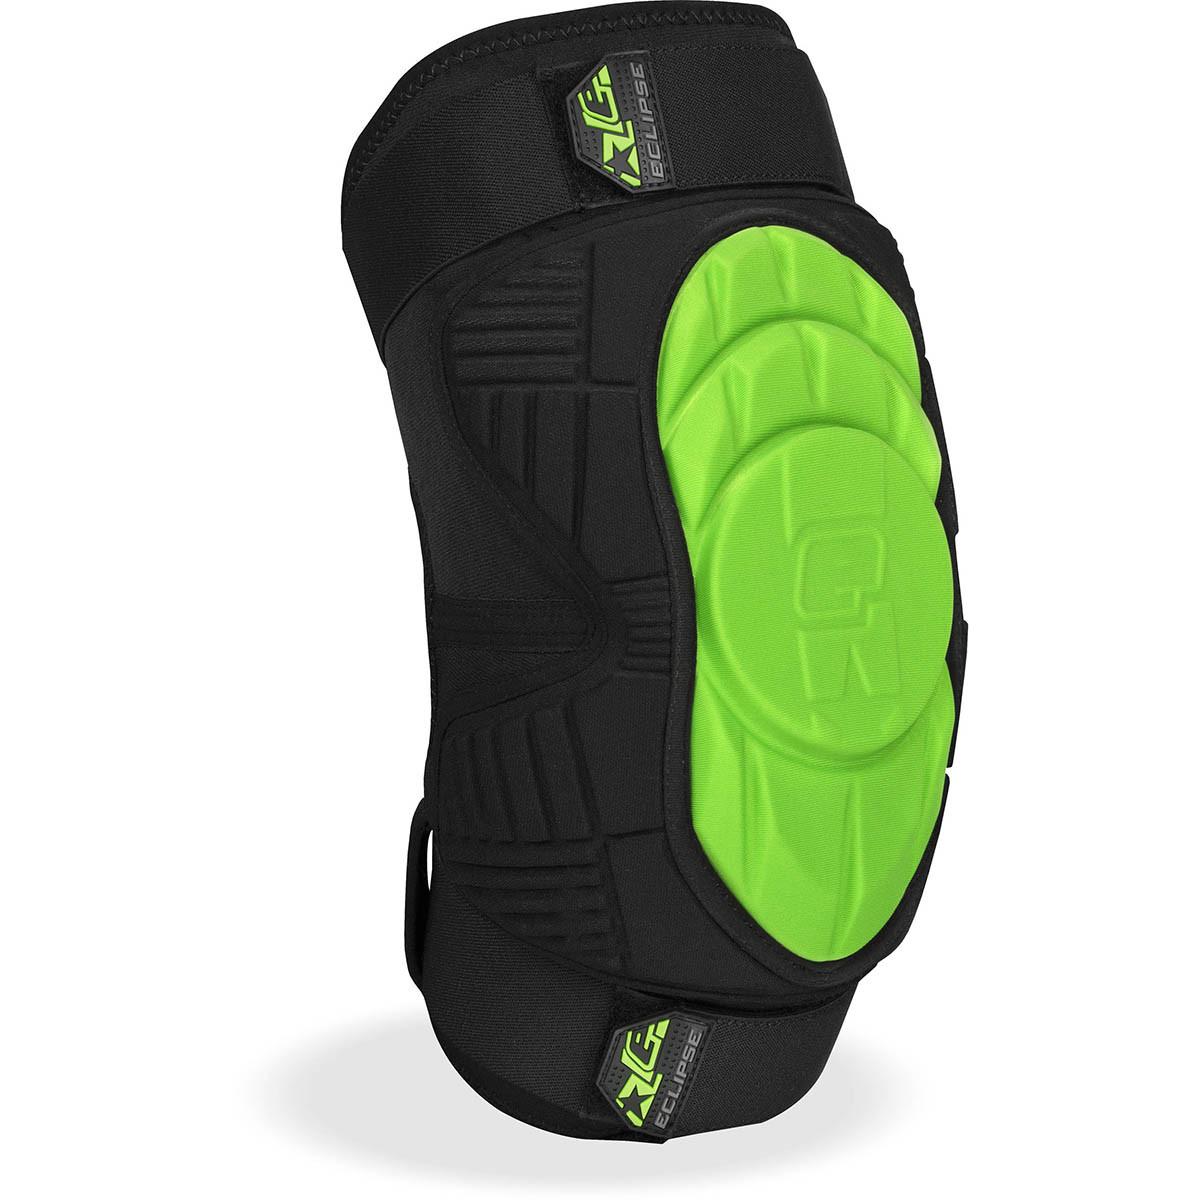 Planet Eclipse HD Core Knee Pads G3 Green